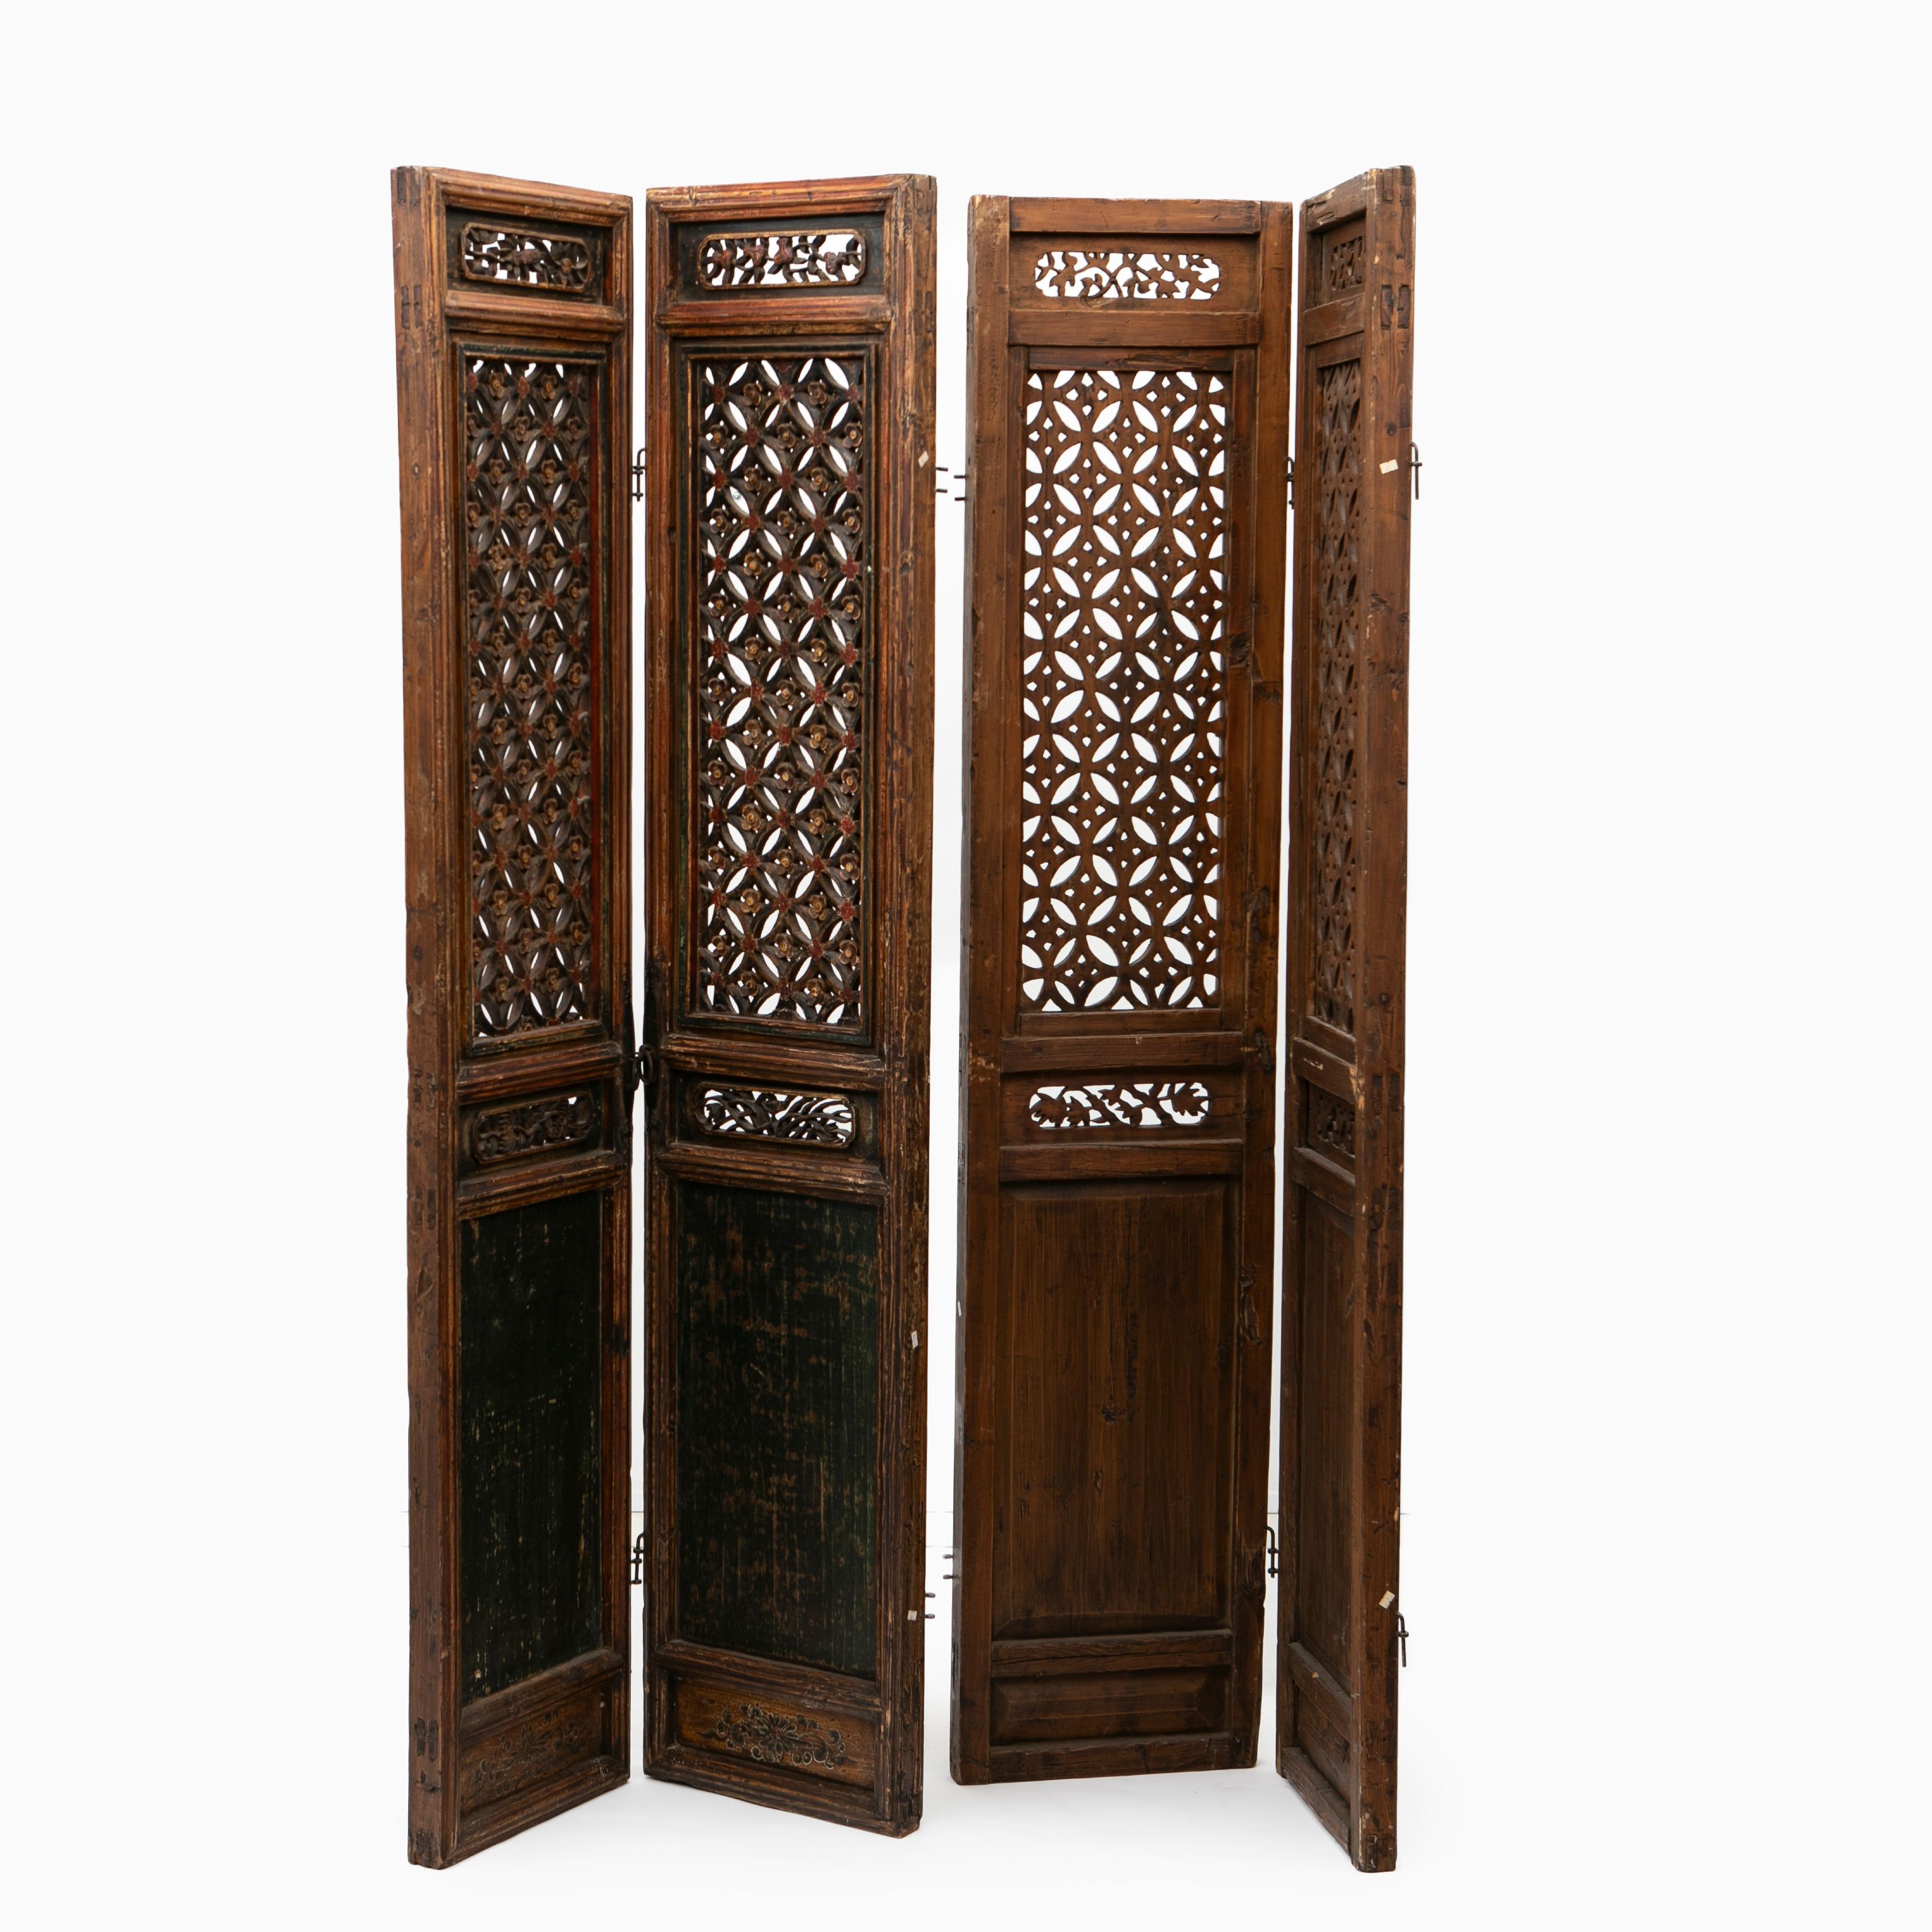 Set of six wood carved Chinese 17-18th century Qing dynasty panels or room divider.
Each panel features an main section with an open fretwork design lattice panel window, comprised by a pattern of a connecting cherry blossoms. Relief foliate lattice